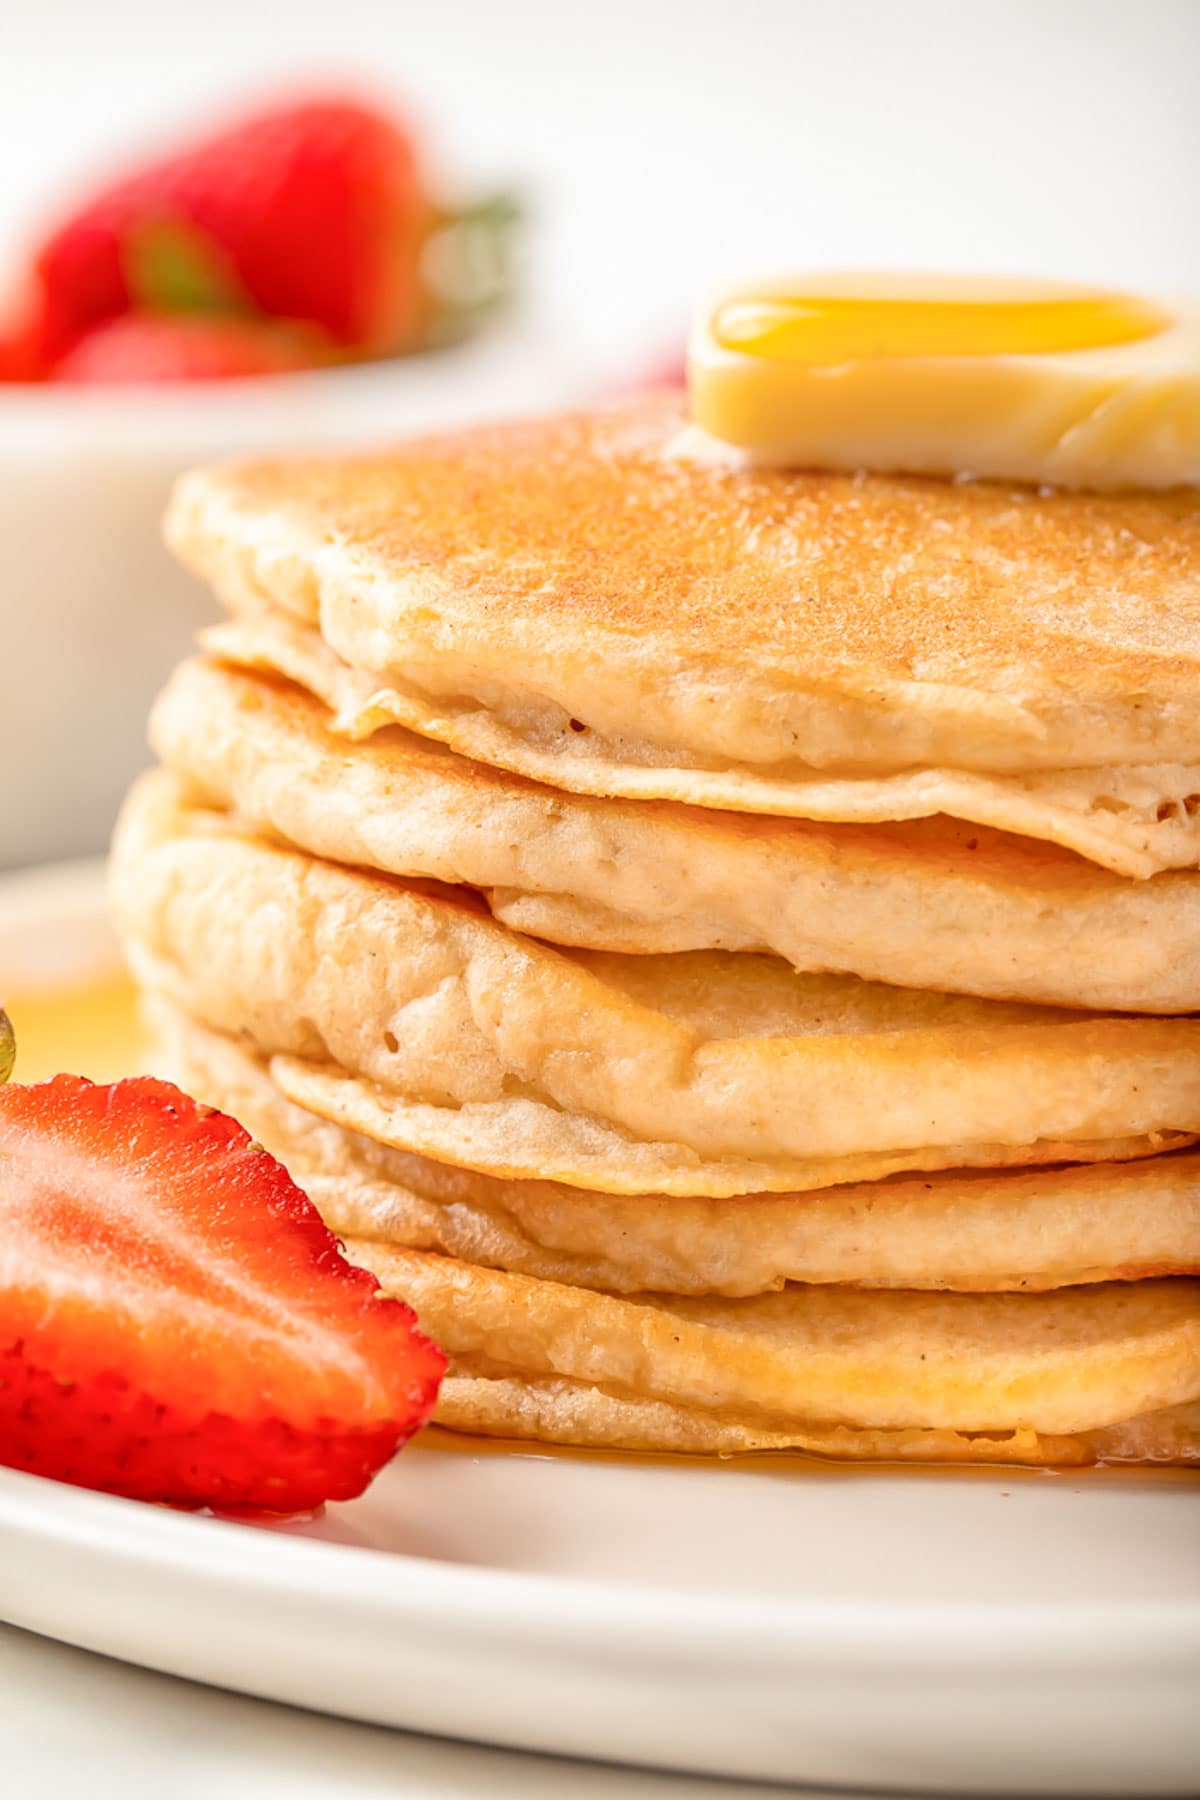 A stack of fluffy, gluten-free pancakes on a white plate with a halved strawberry.